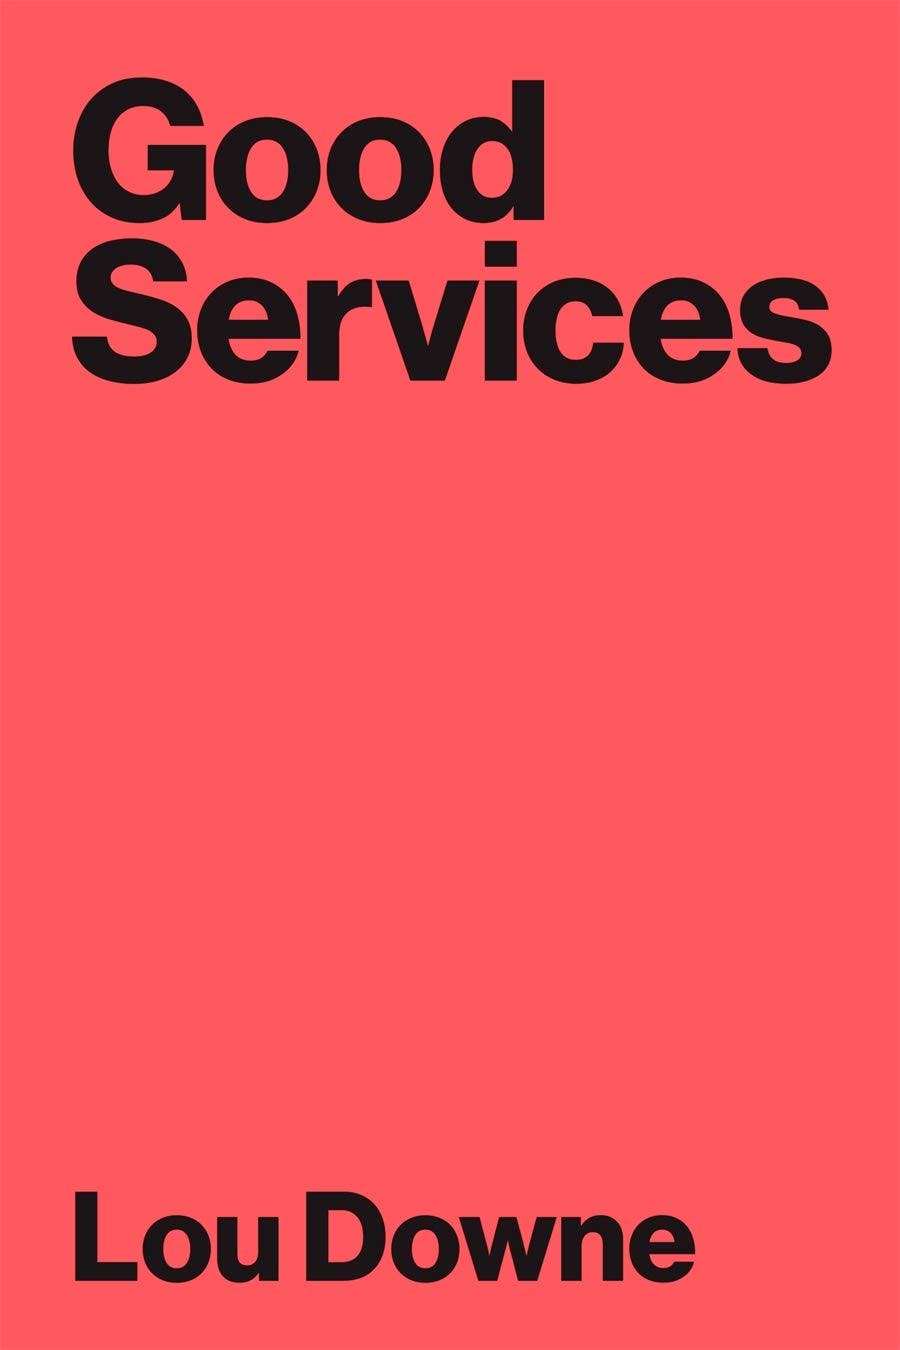 The media cover for “Good Services” by Lou Downe